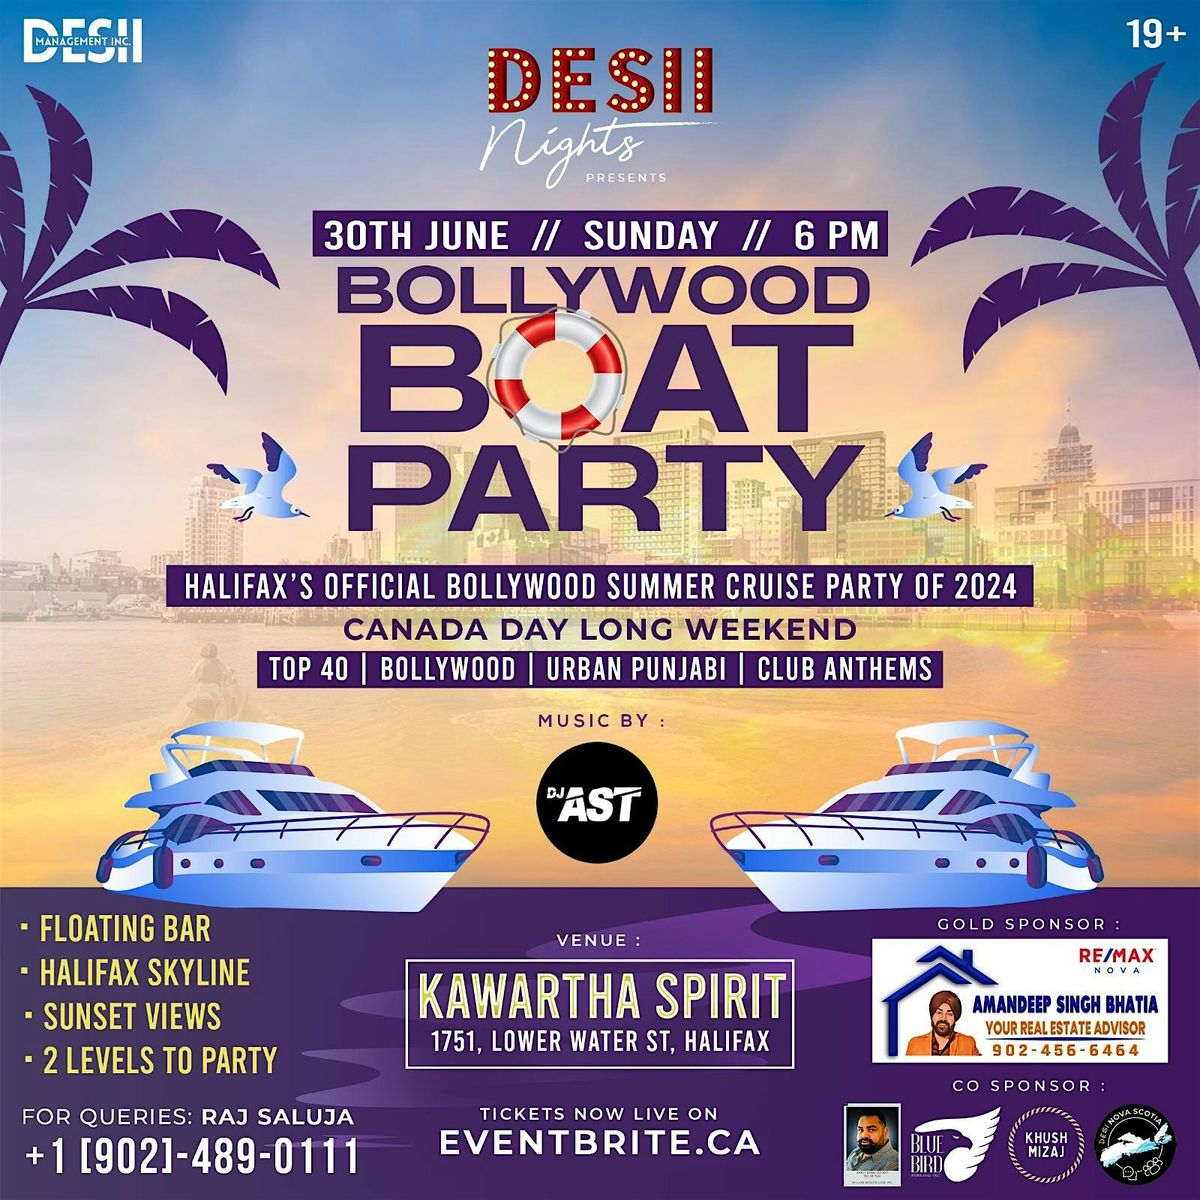 BOLLYWOOD BOAT PARTY -HALIFAX'S OFFICIAL SUMMER CRUISE PARTY | DESII NIGHTS